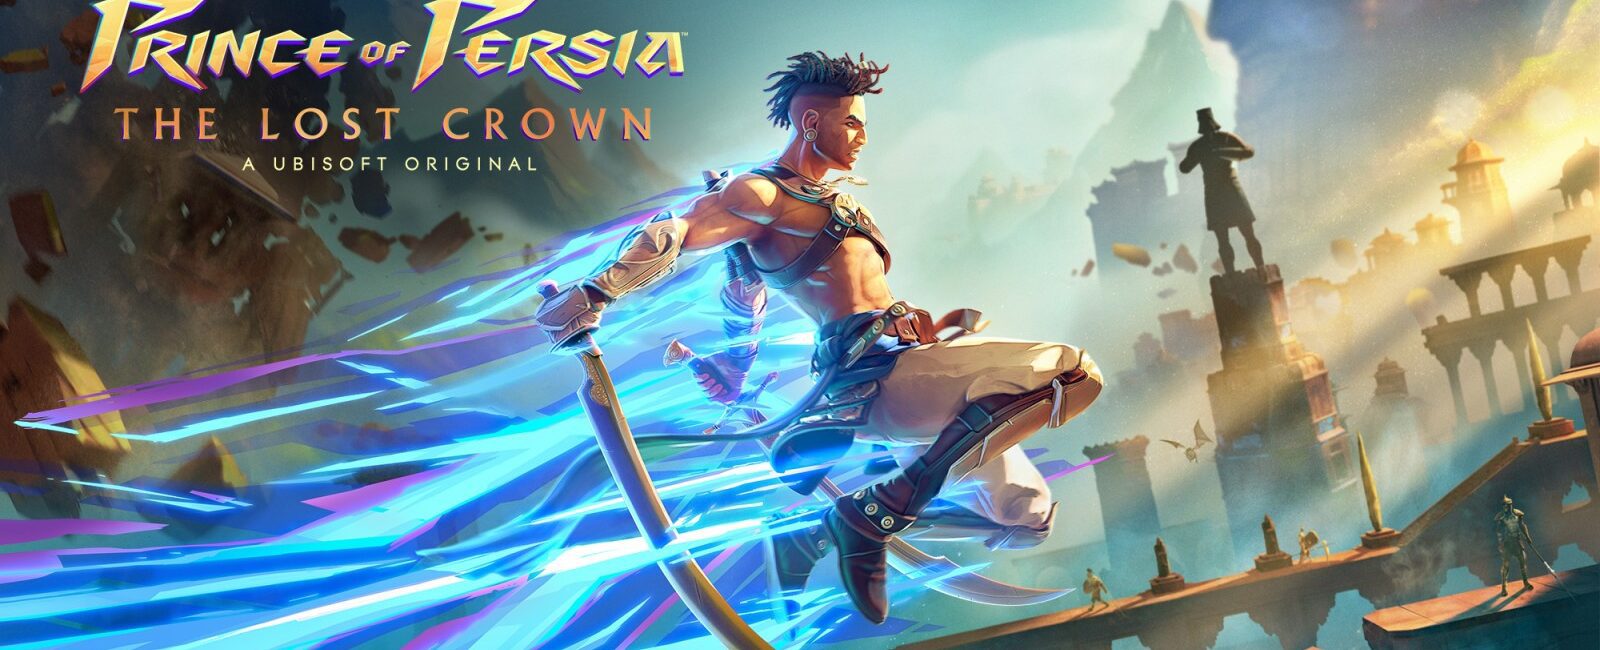 Prince of Persia: The Lost Crown Nintendo Switch game header